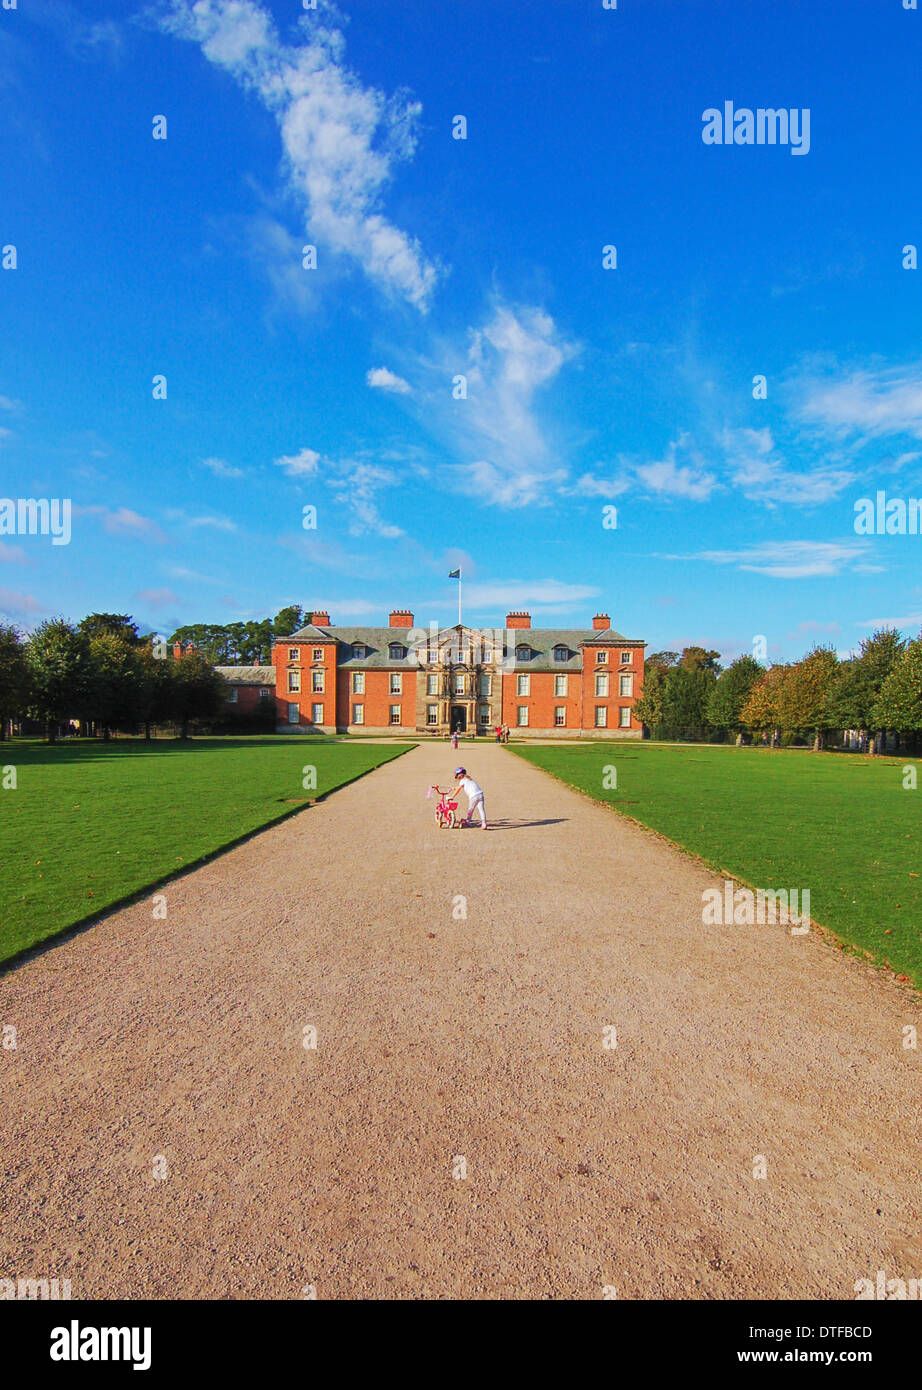 Little girl and her bike on the long road to a stately home Stock Photo